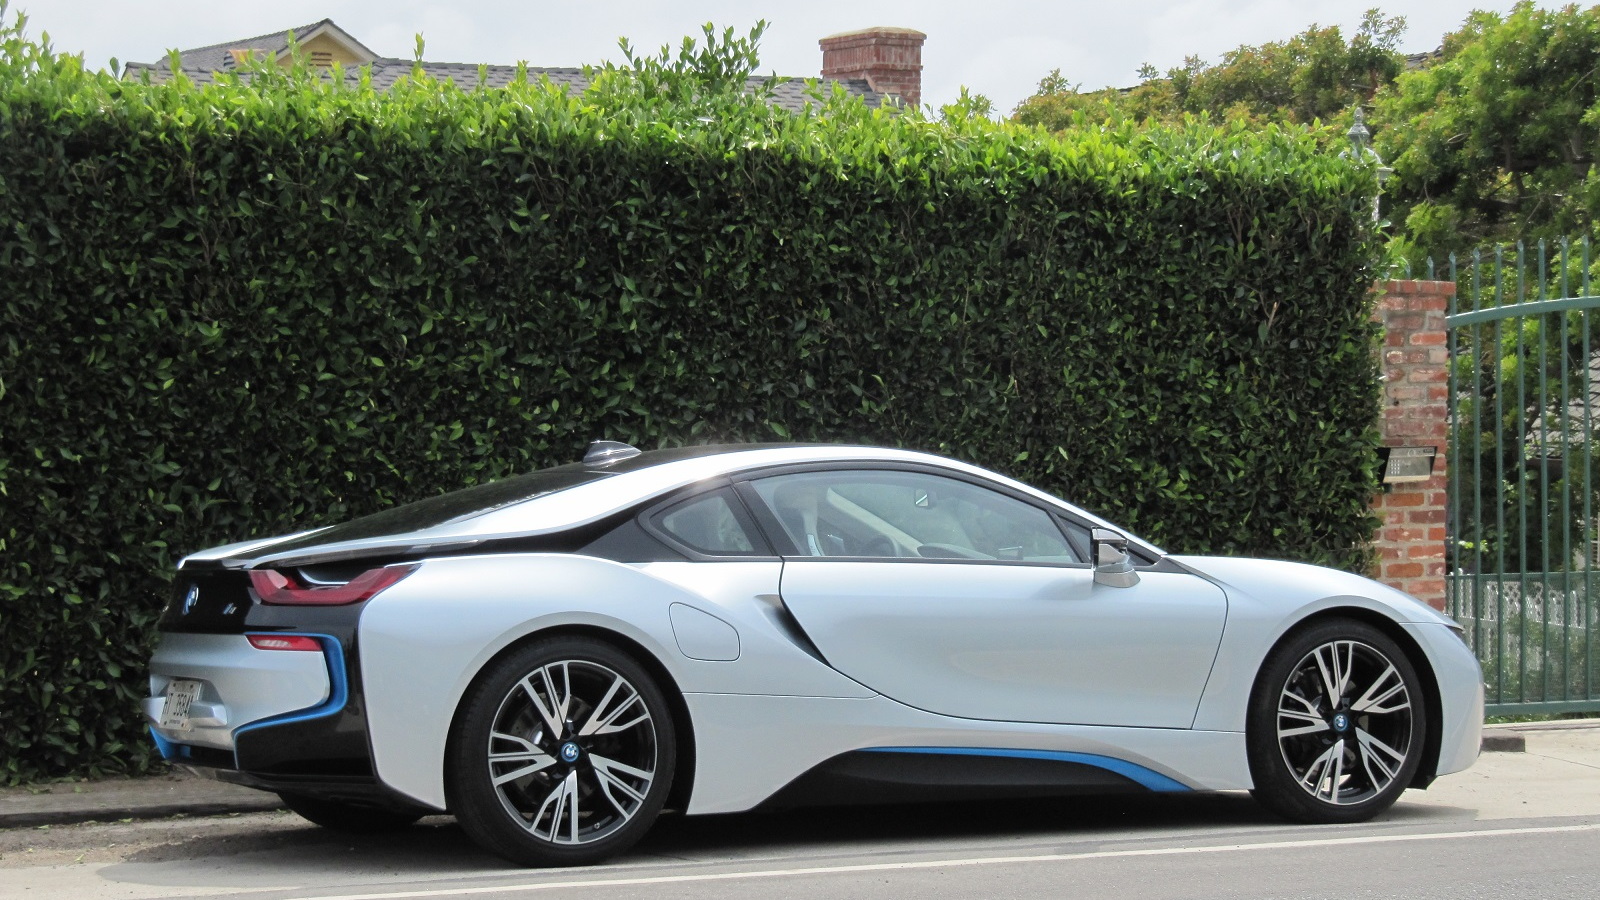 2015 BMW i8, test drive in greater Los Angeles area, Apr 2014